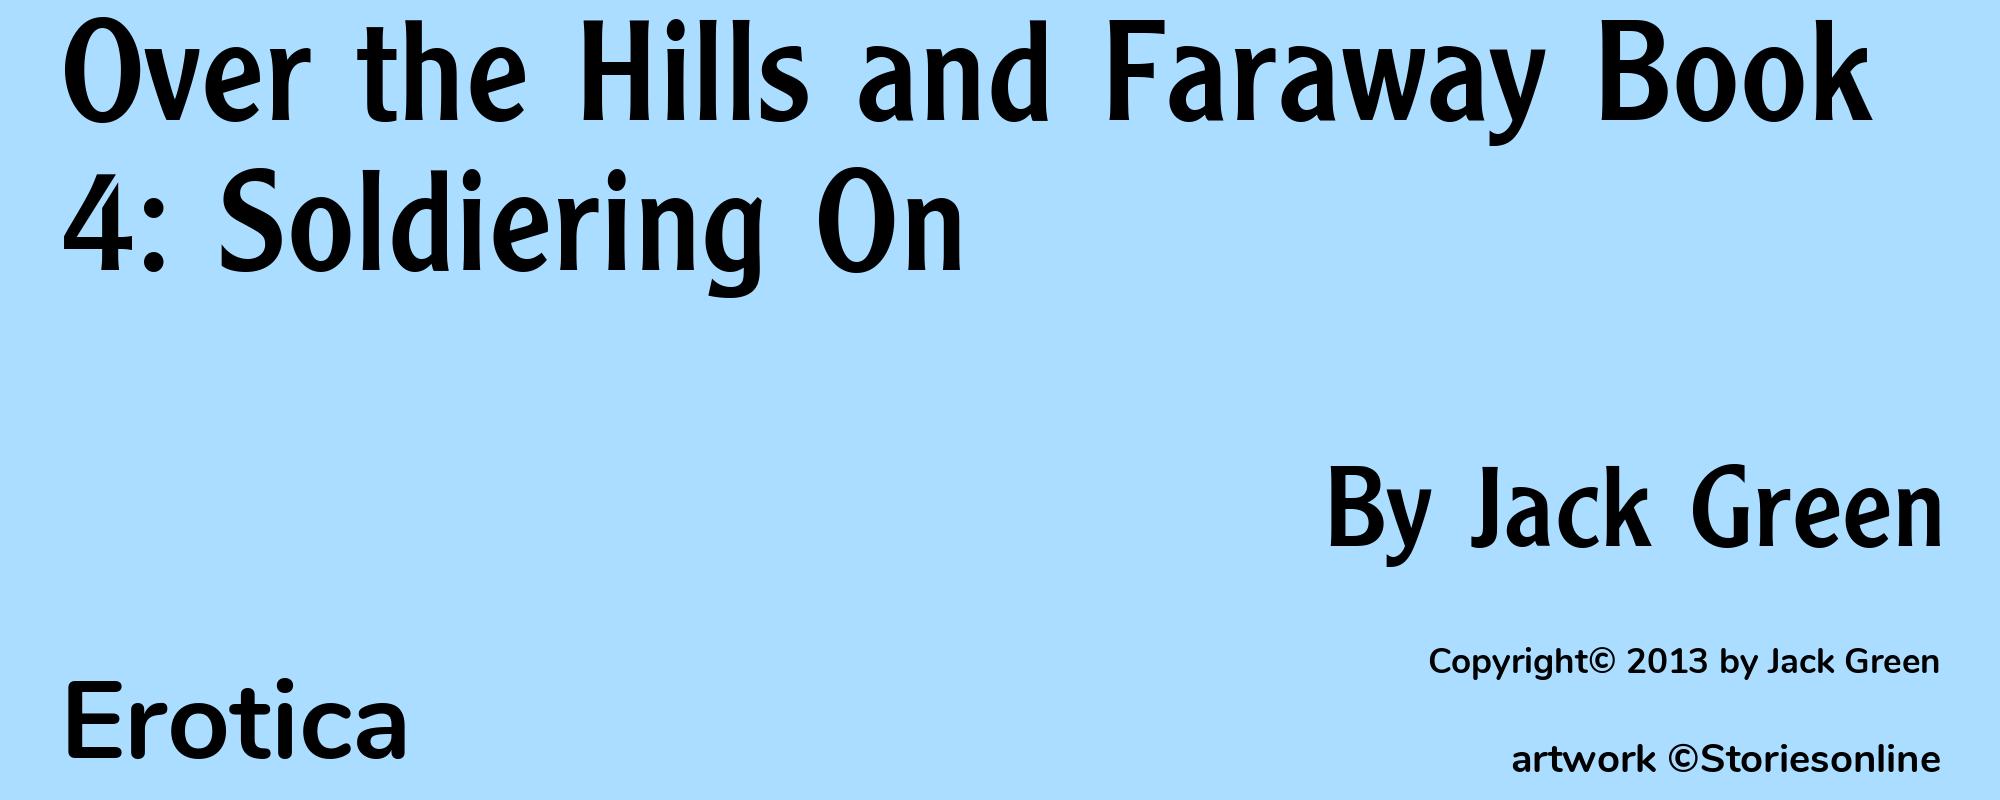 Over the Hills and Faraway Book 4: Soldiering On - Cover